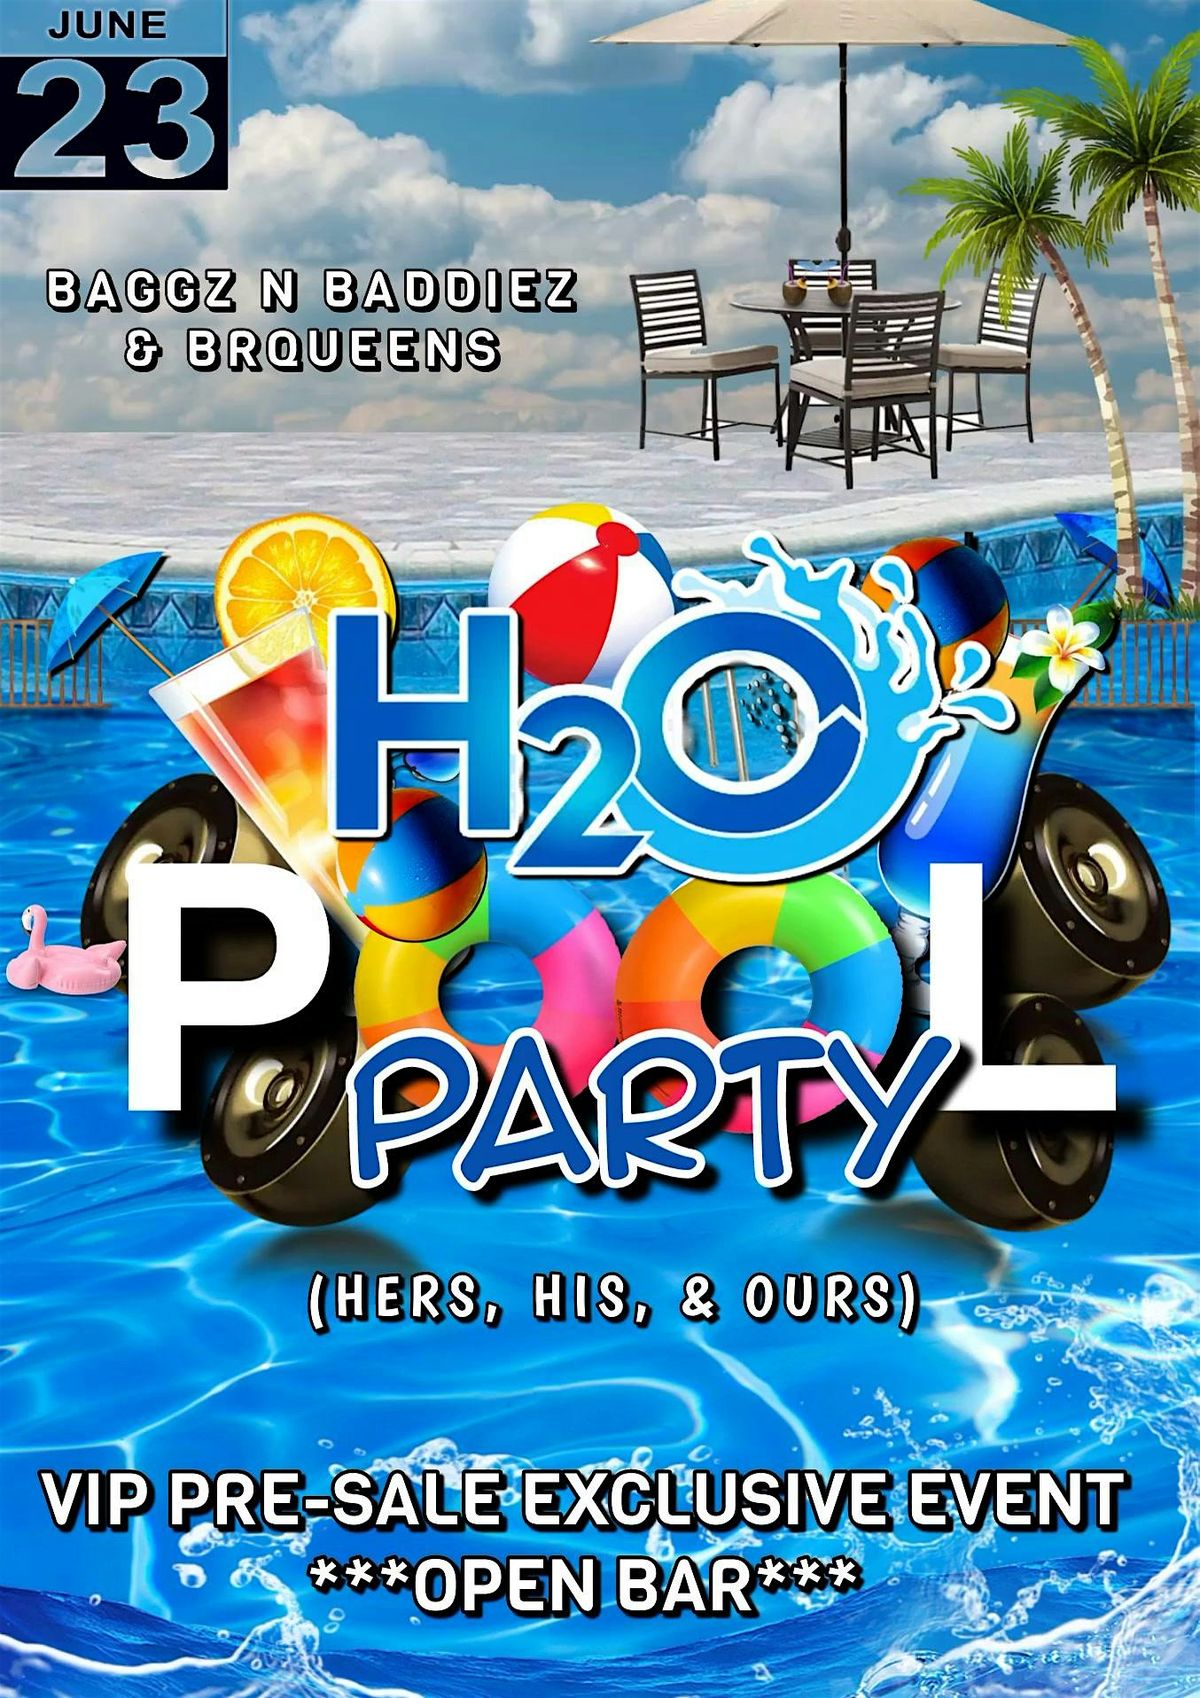 Baton Rouge Urban Pride: H20 (Hers, His, & Ours) Pool Party